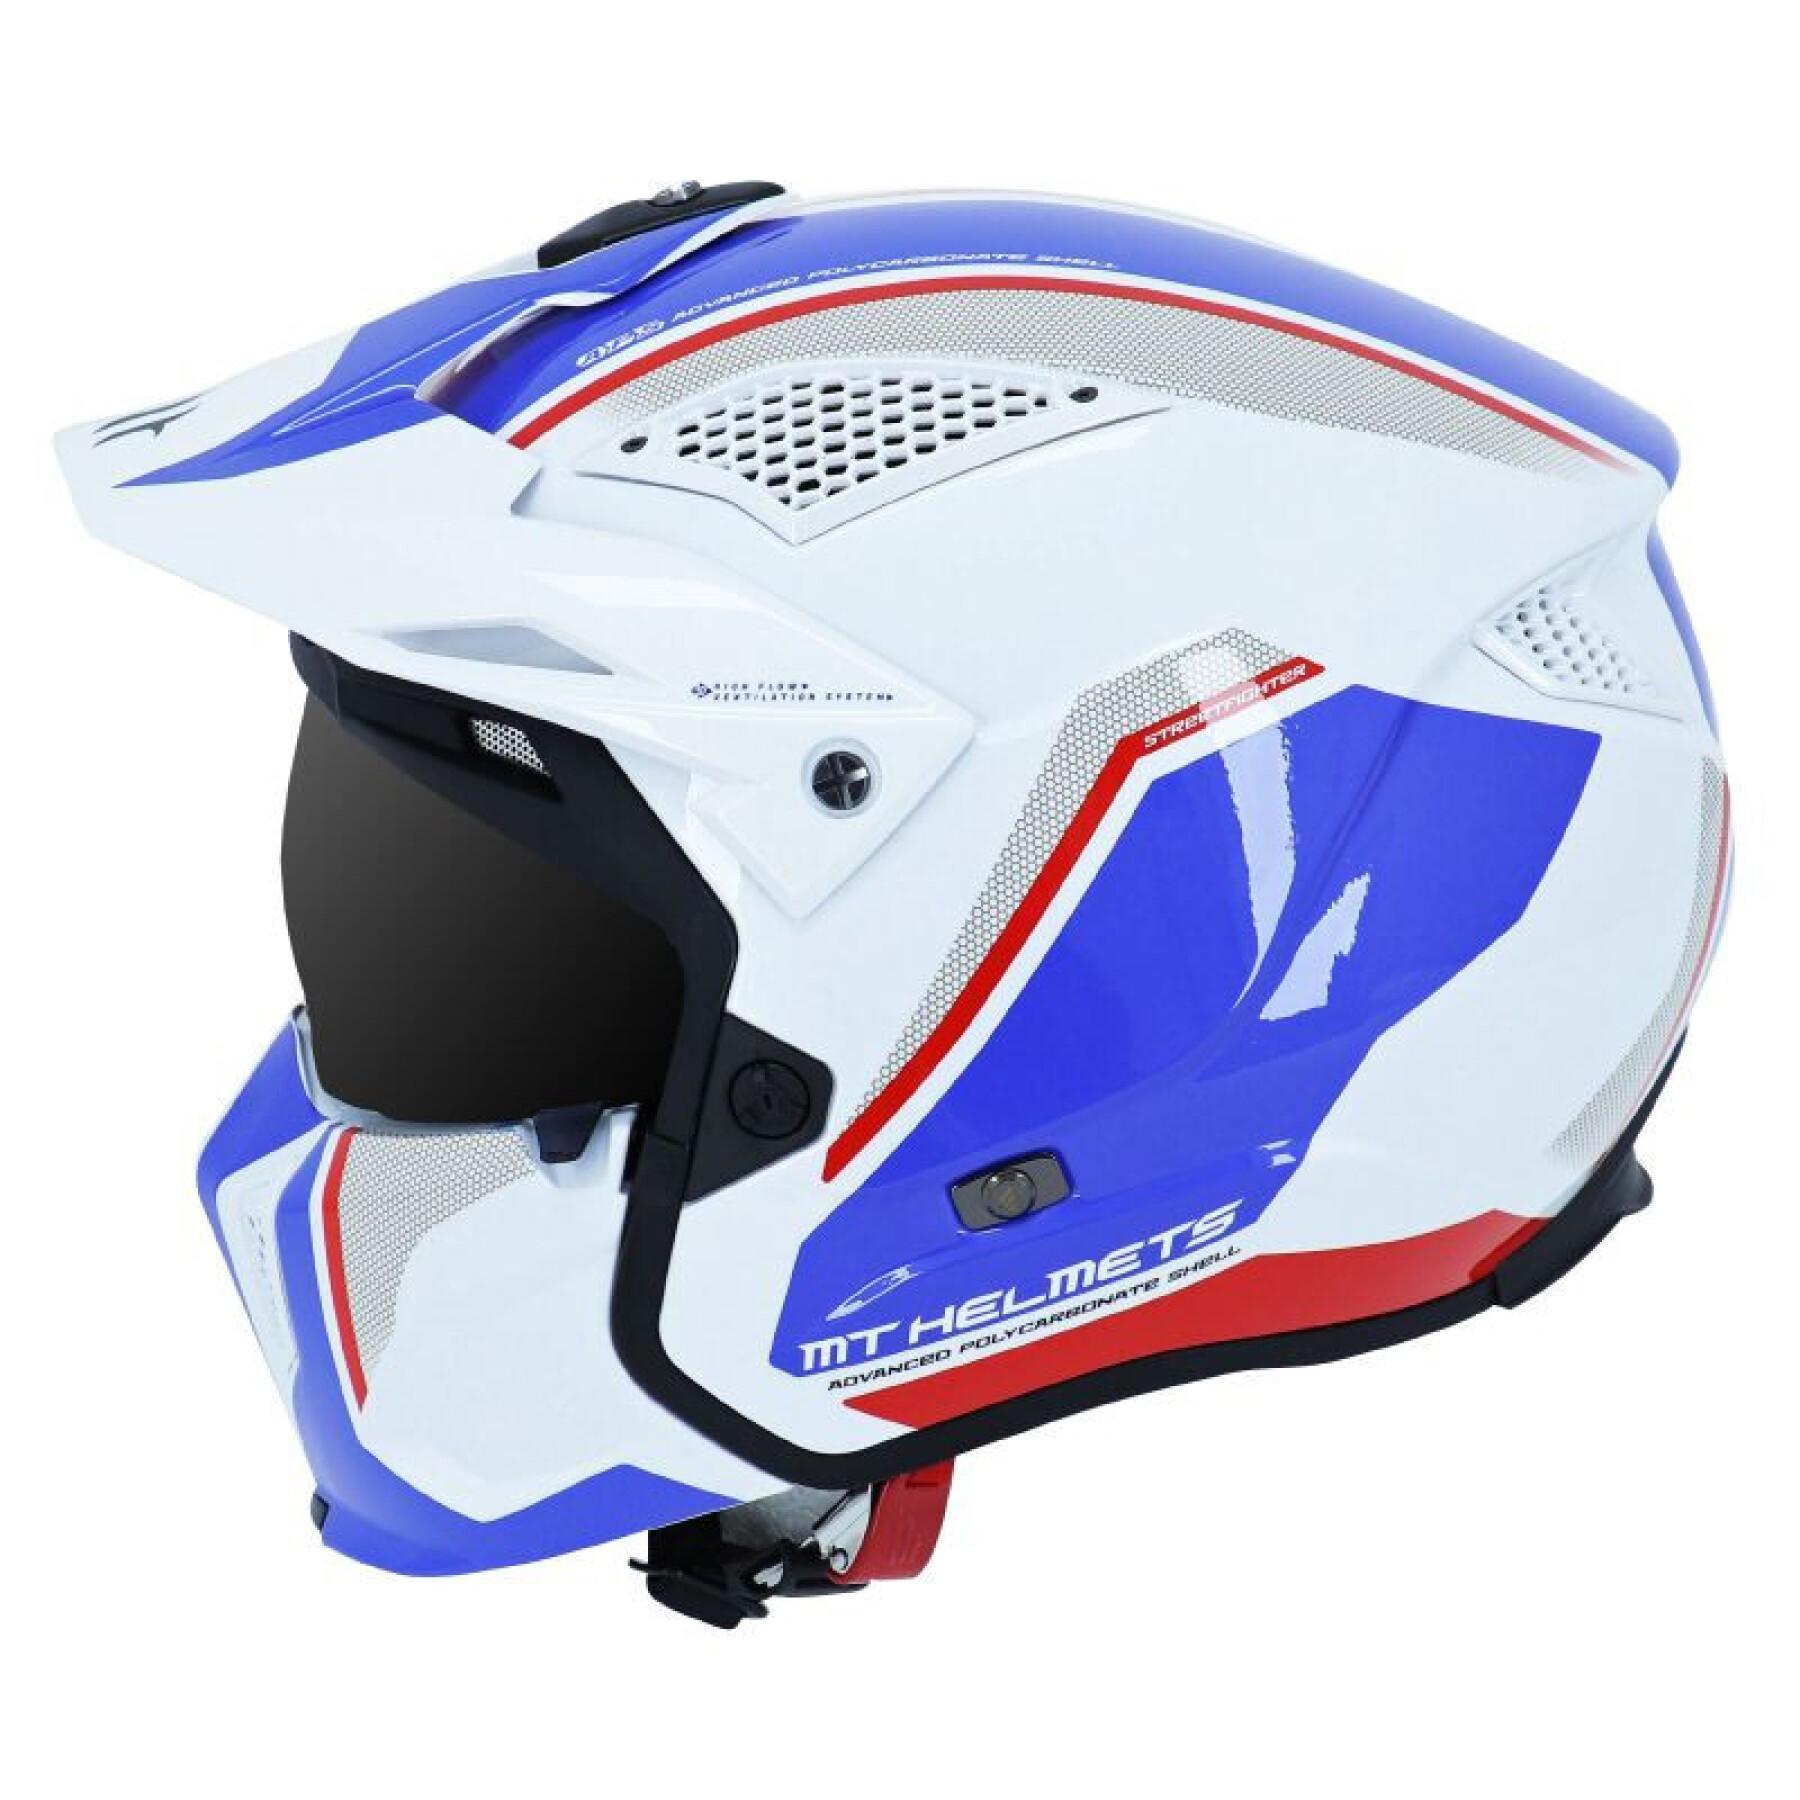 Dark convertible single shield helmet with removable chin strap MT Helmets MT STREetFIGHTER SV SKULL(delivered with an additional blue shield)